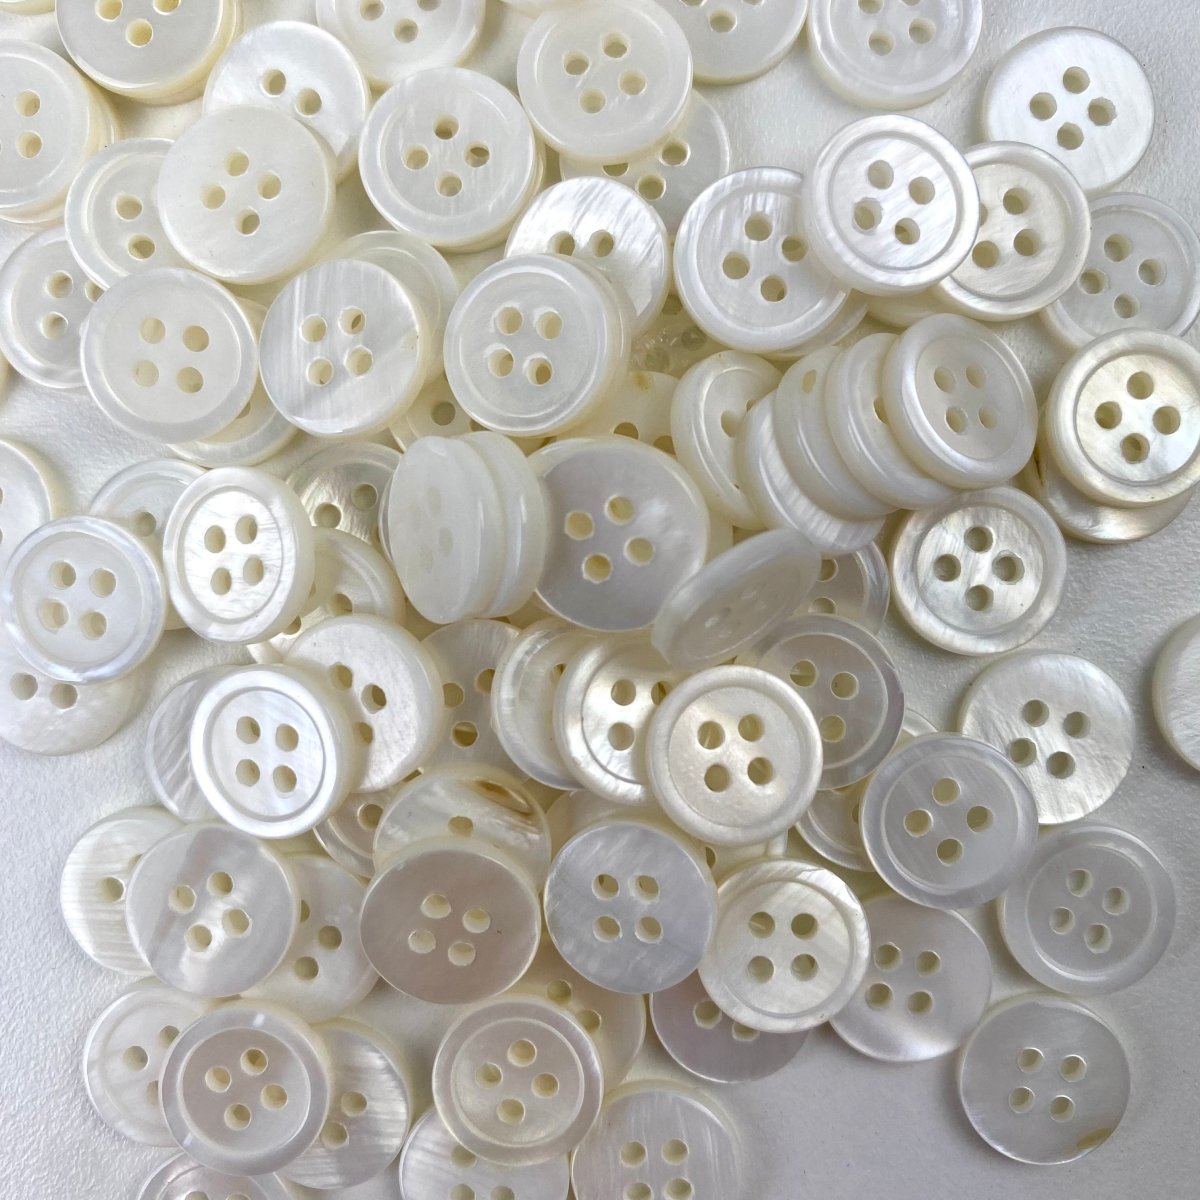 Sewing Gem - 4 Hole White Pearl Buttons - 11.5mm - Sewing Gem